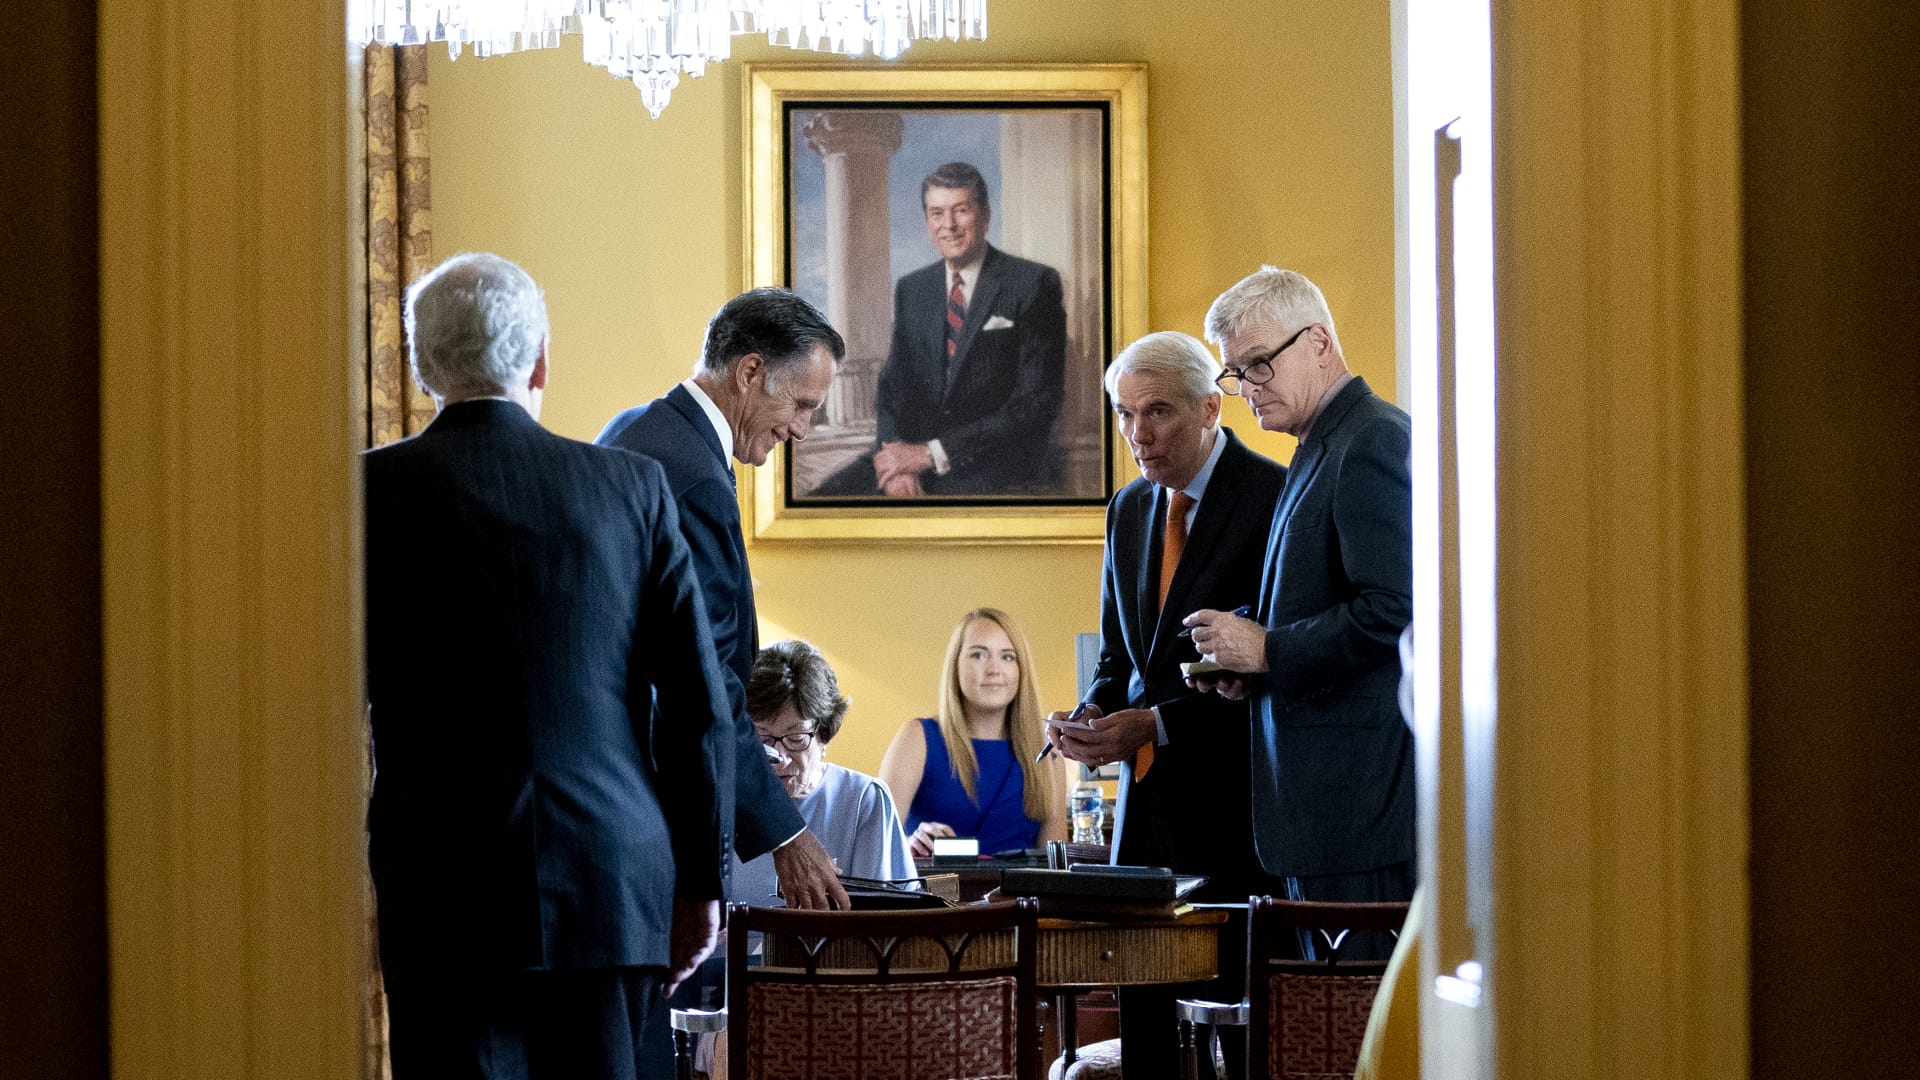 Senate Minority Leader Mitch McConnell meets with Senators Mitt Romney, Susan Collins, Rob Portman, Bill Cassidy and Lisa Murkowski gather in McConnell's office at the Capitol on Wednesday, July 28, 2021.